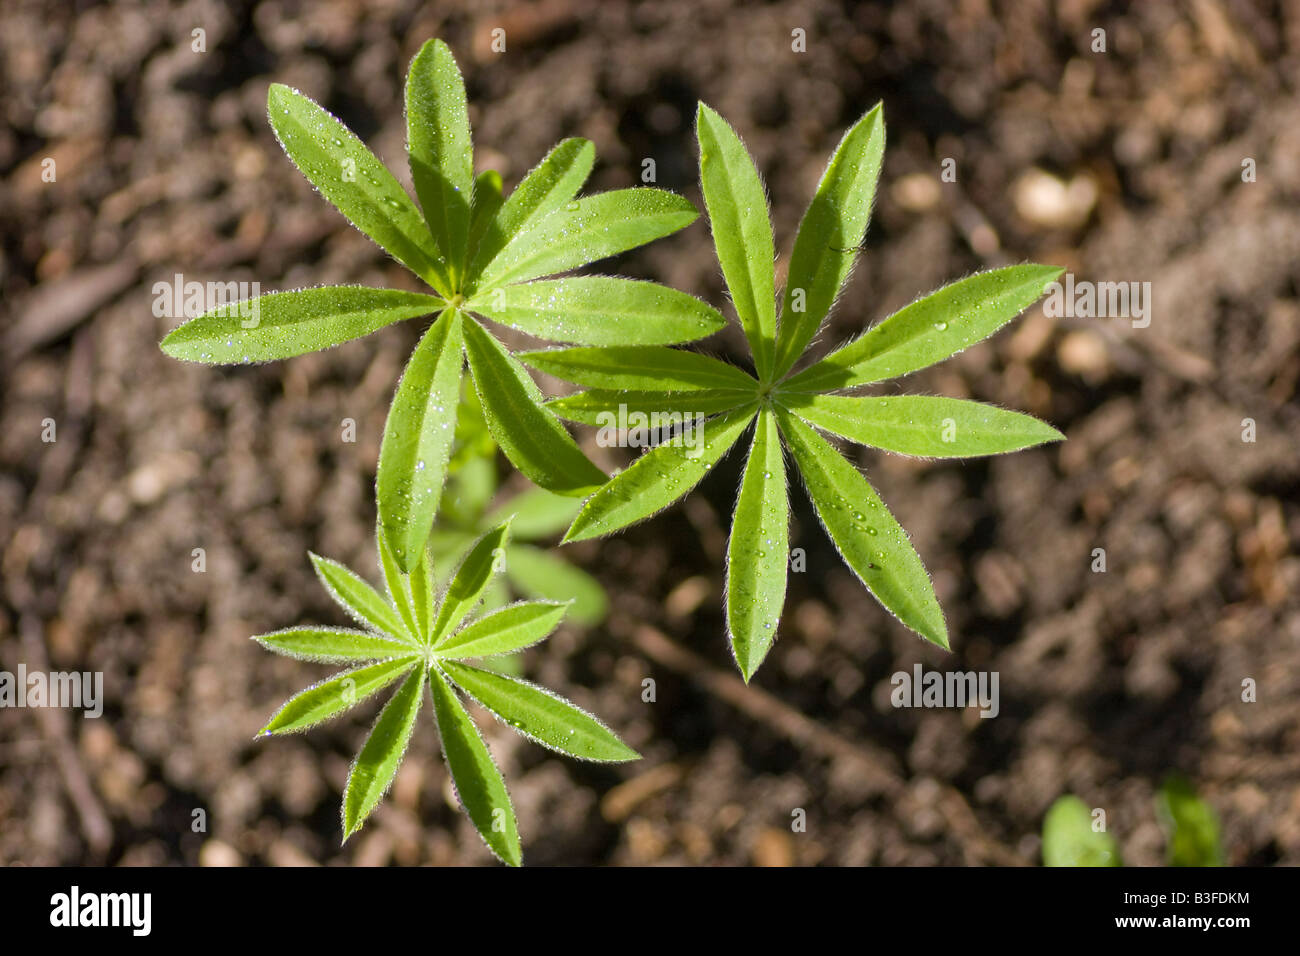 The seedling of a lupin plant Lupins can fix nitrogen from the atmosphere into ammonia fertilizing the soil for other plants Stock Photo